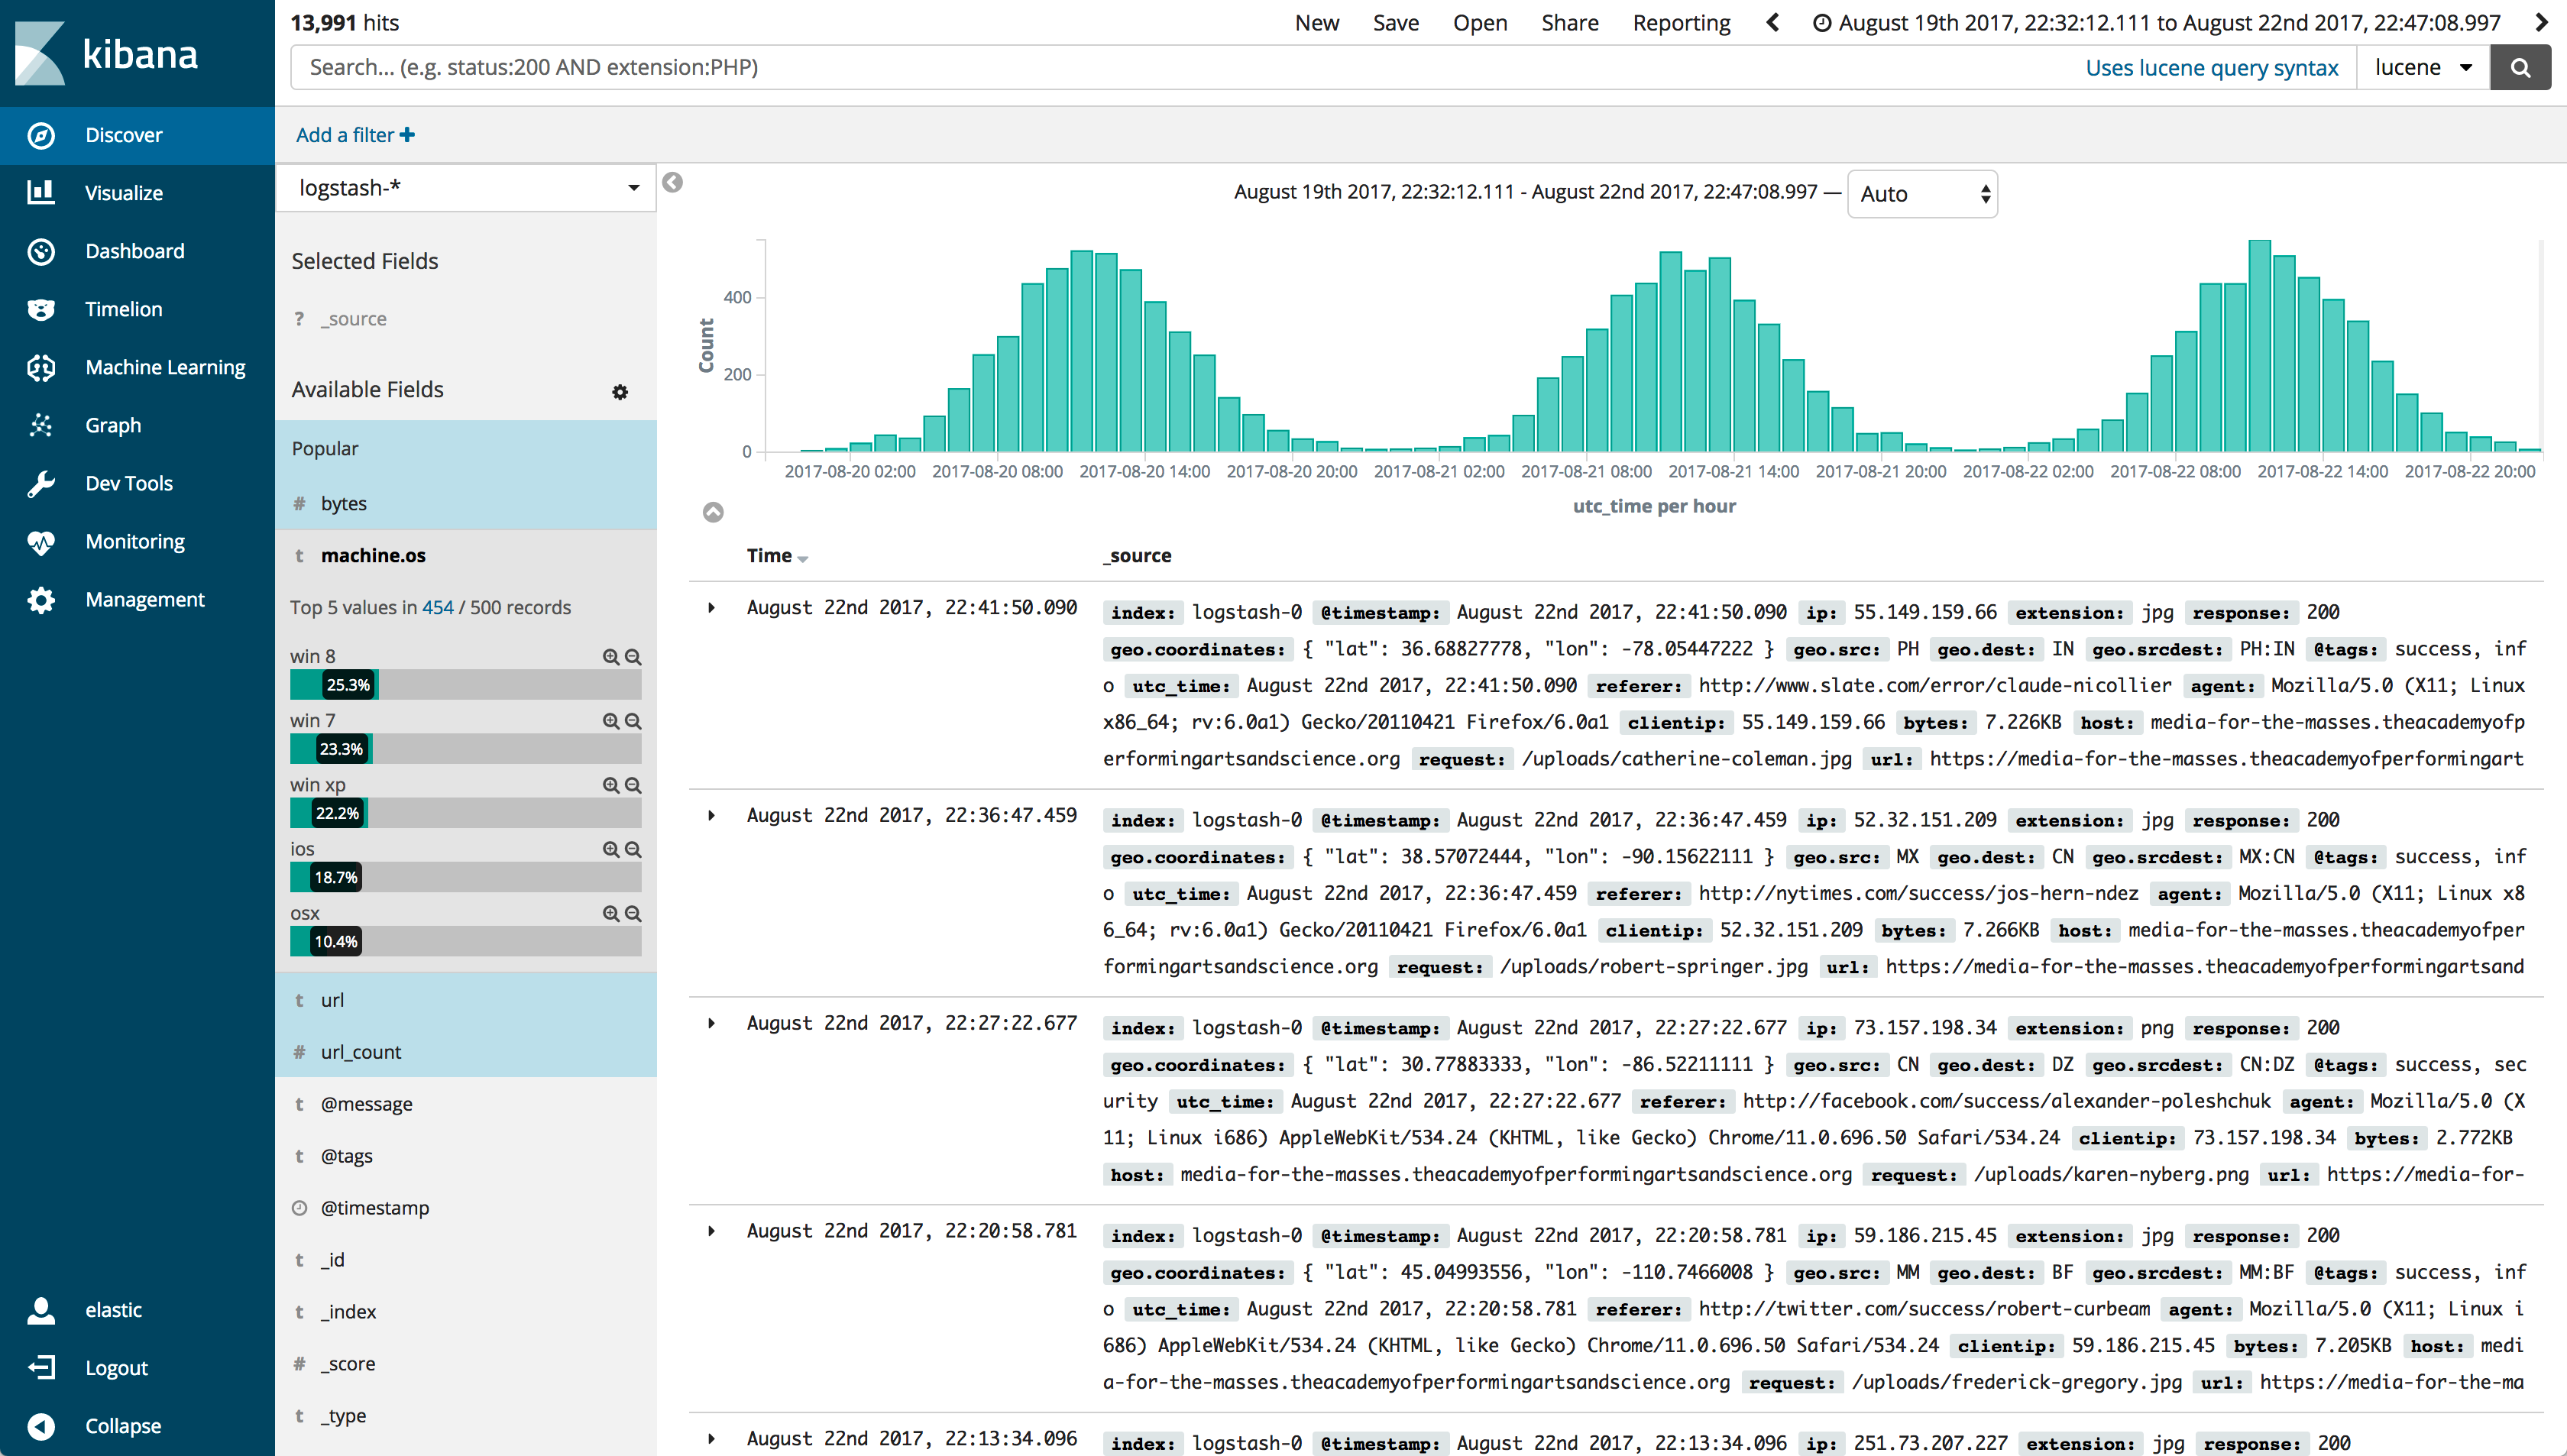 A screenshot showing the new Kibana 6 color scheme with a better contrast